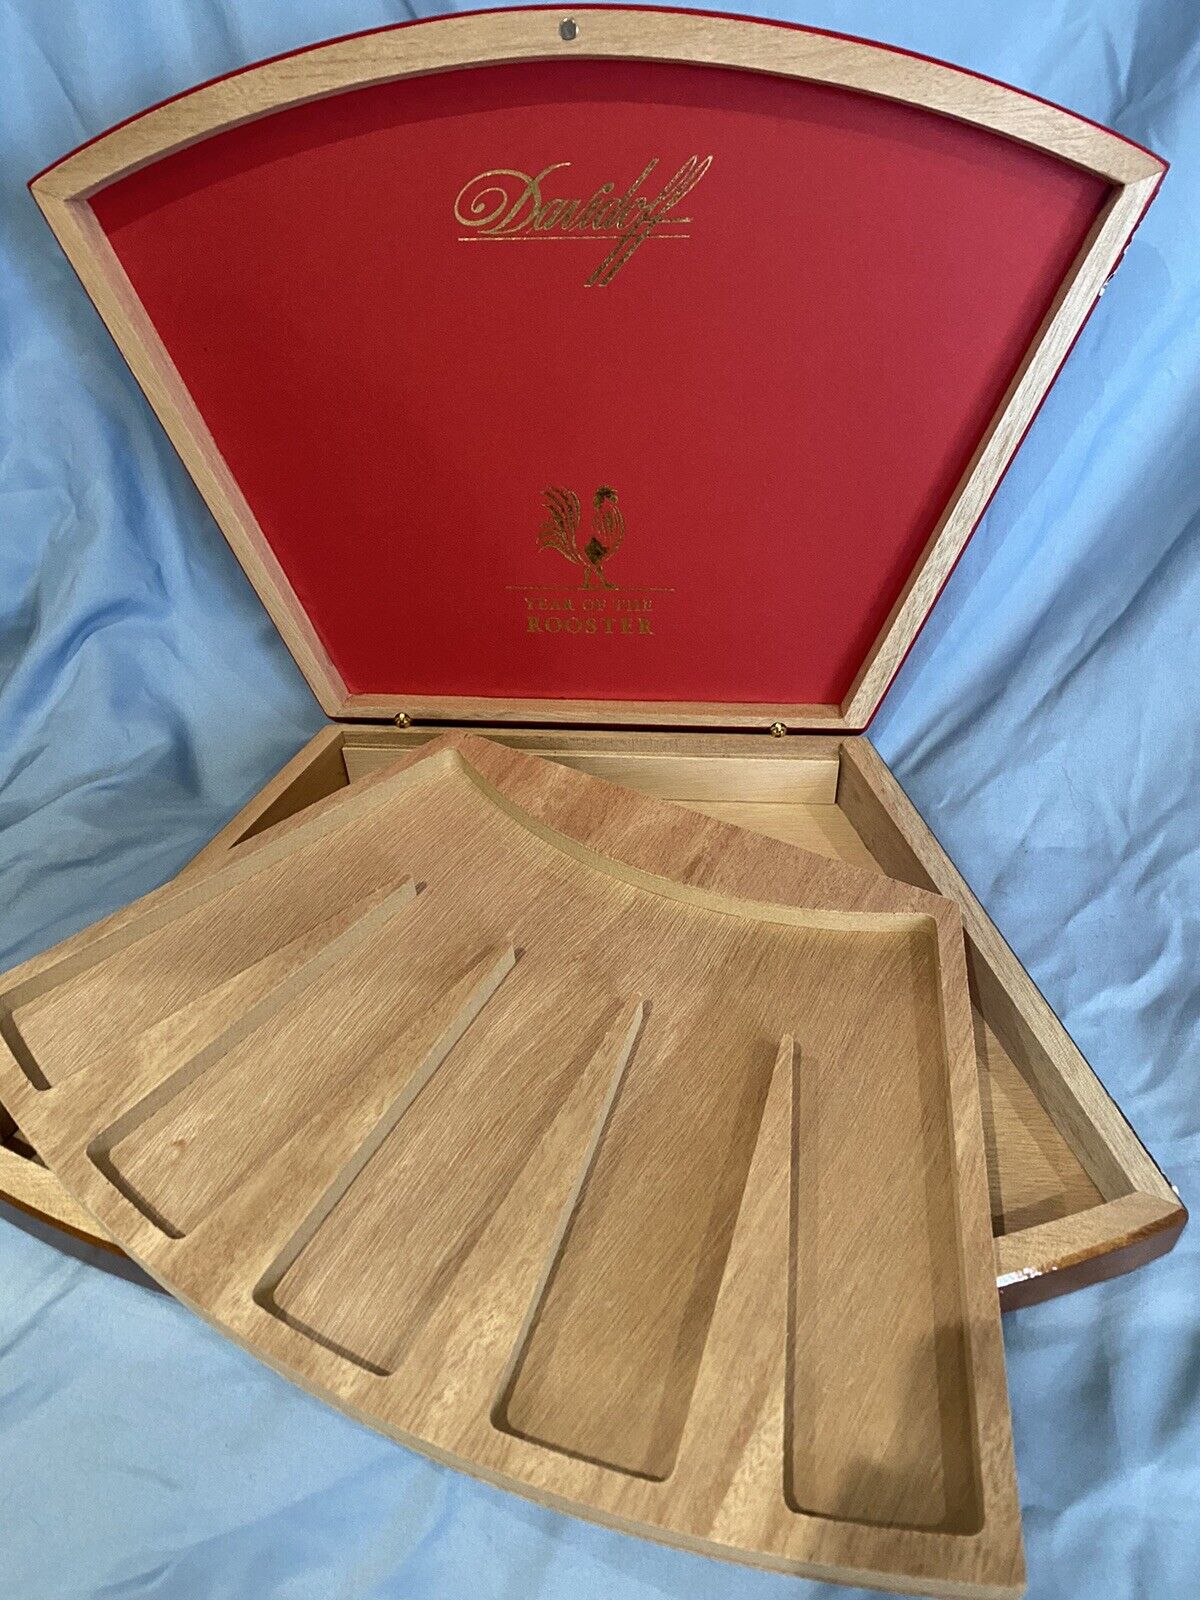 DAVIDOFF YEAR OF THE ROOSTER CIGAR BOX